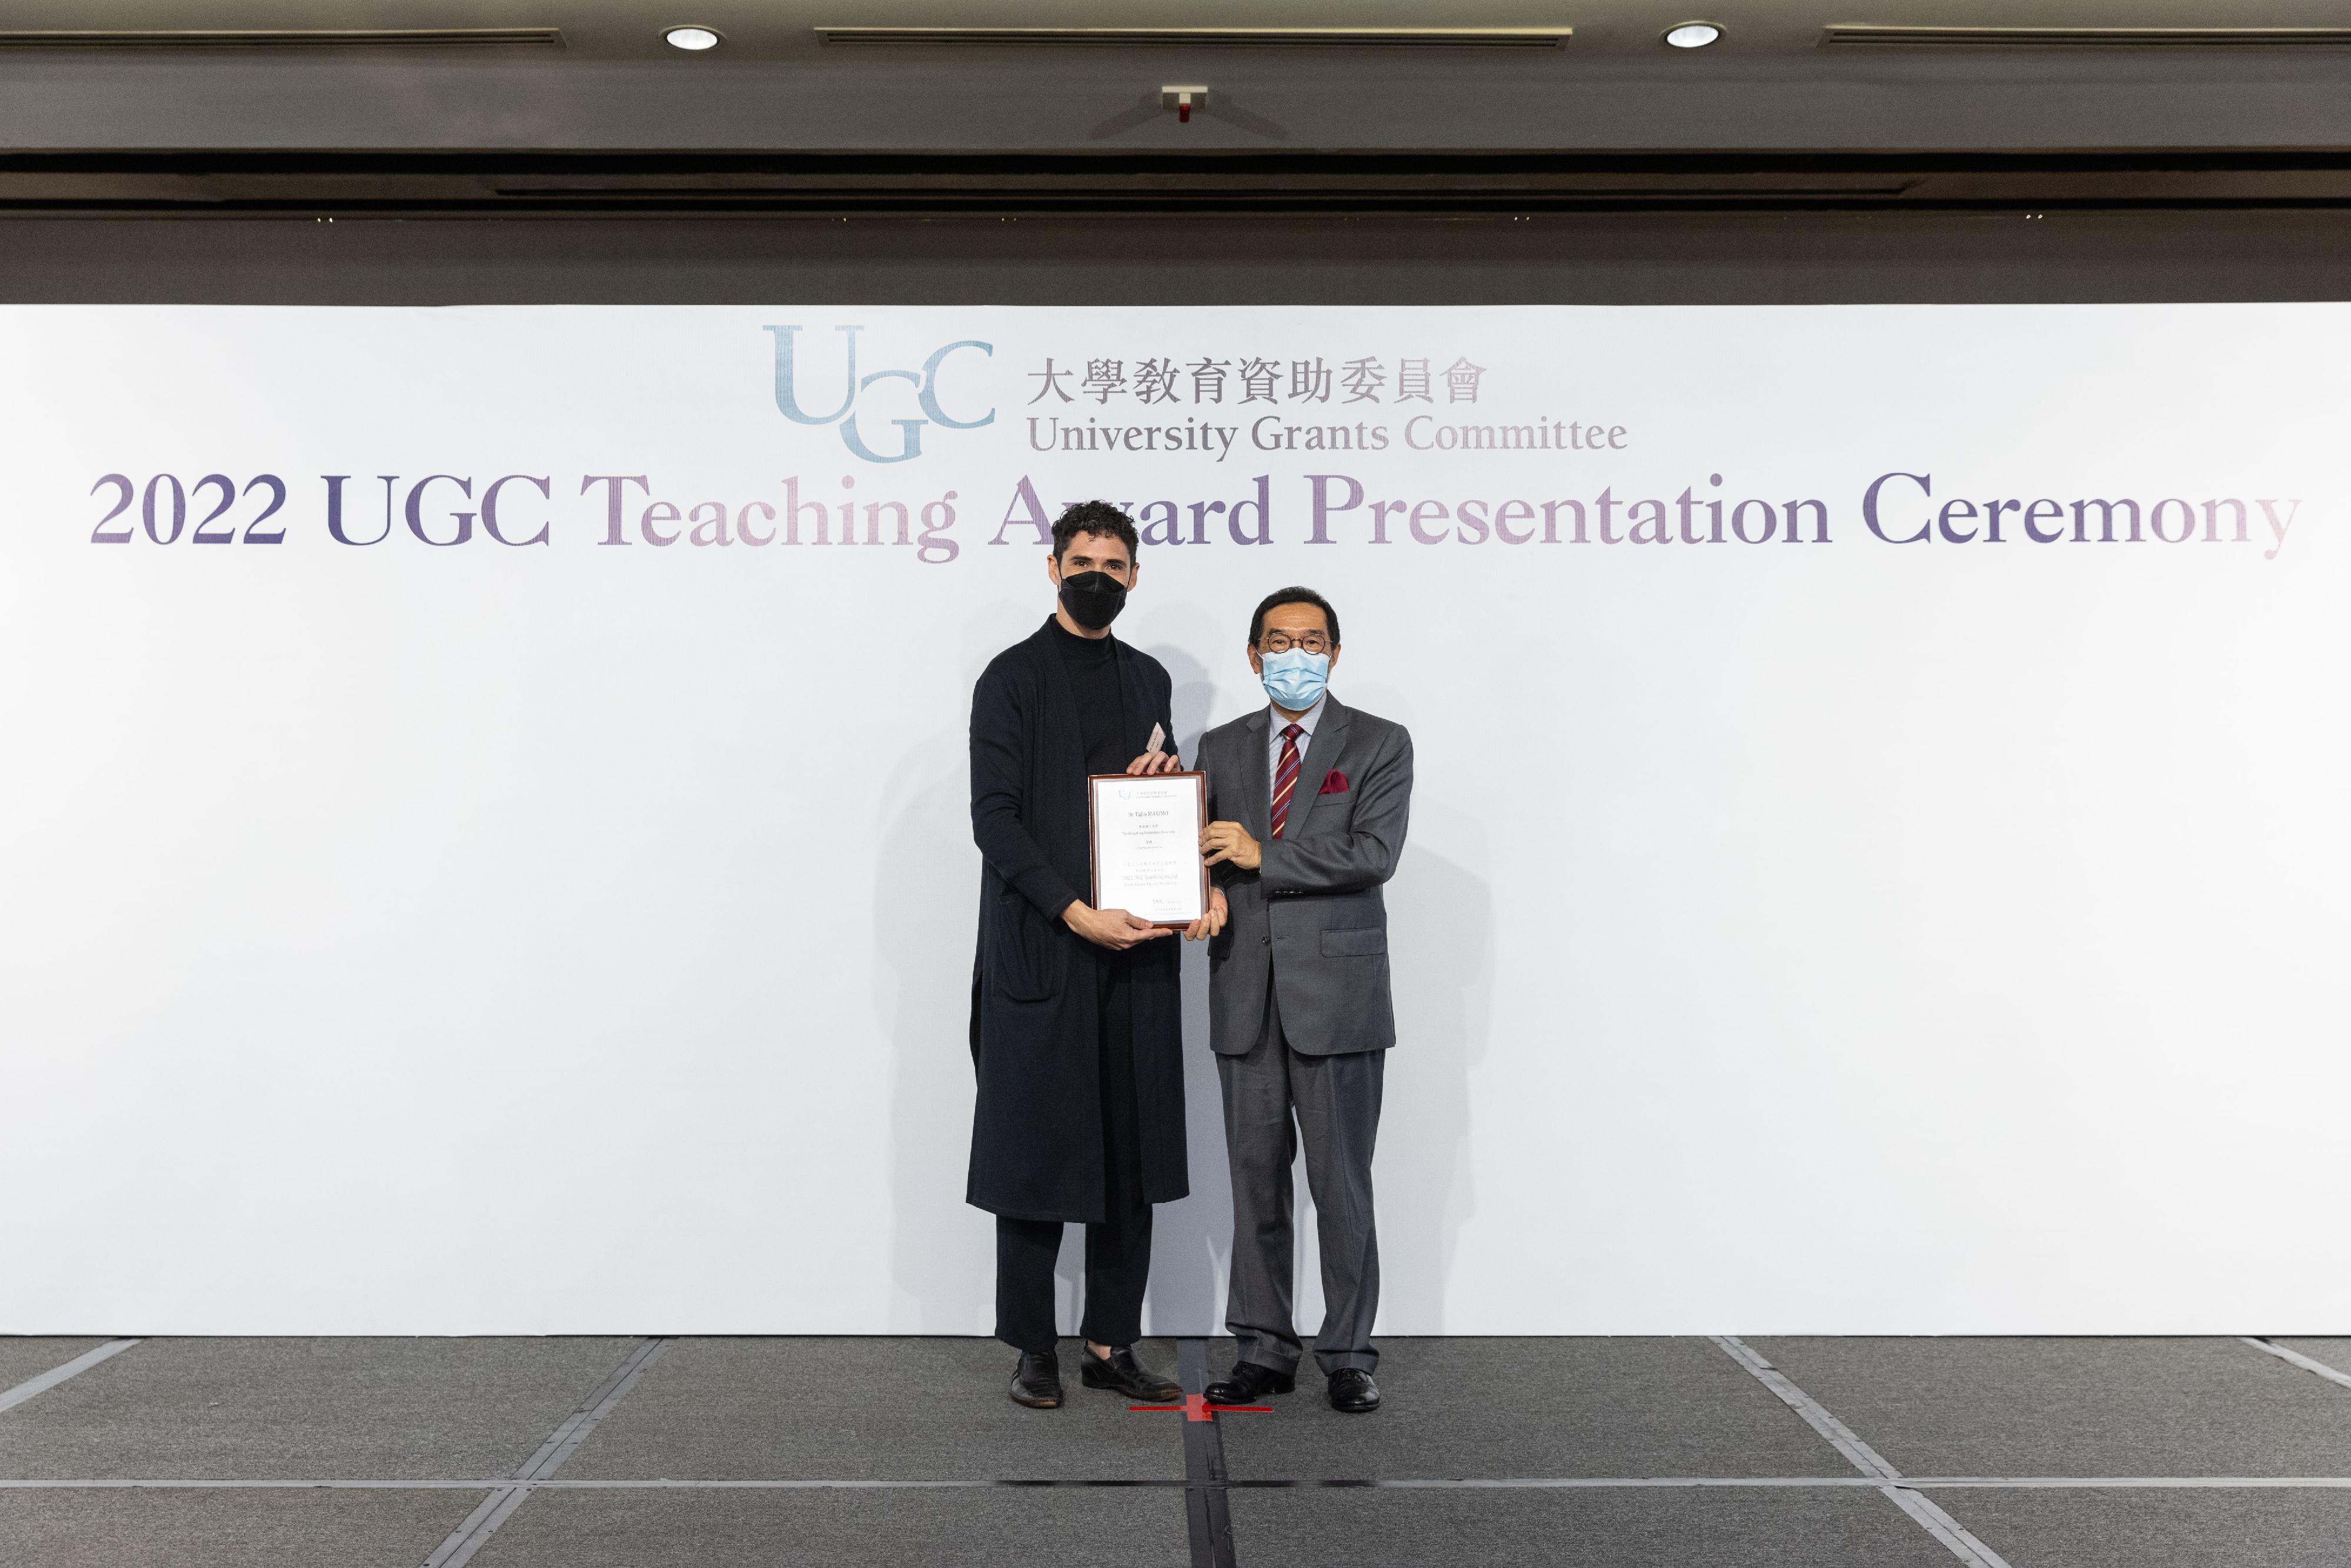 The Chairman of the University Grants Committee (UGC), Mr Carlson Tong (right), presents the 2022 UGC Teaching Award for Early Career Faculty Members to Dr Tulio Maximo.